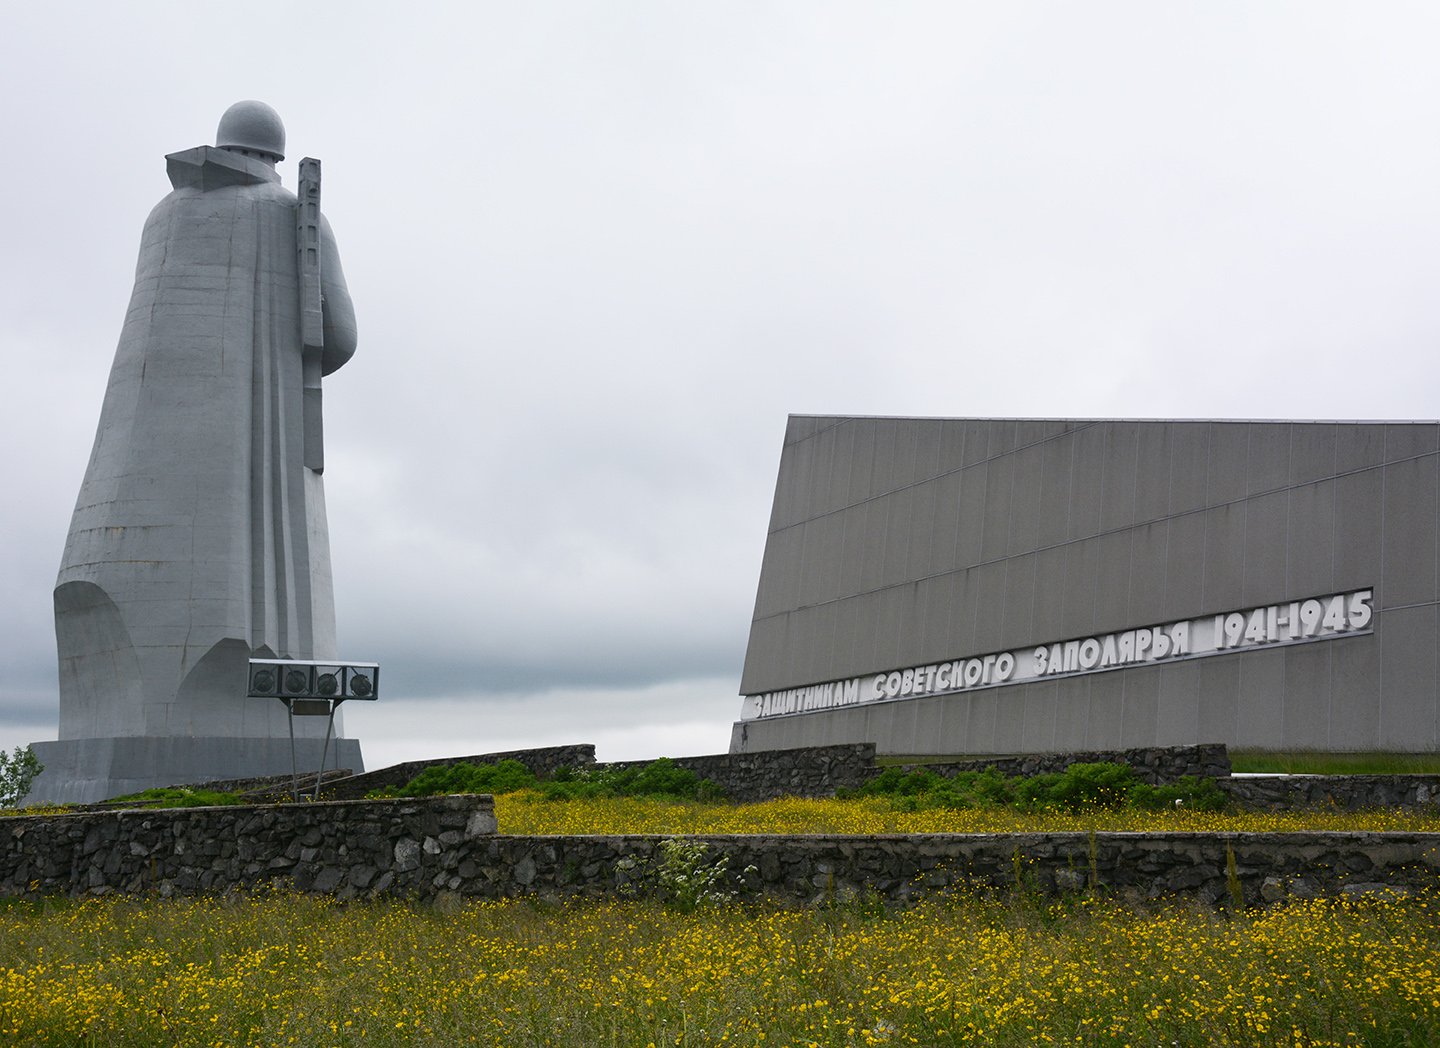 The monument to Alyosha in Murmansk, Russia, honors soldiers of the Second World War.